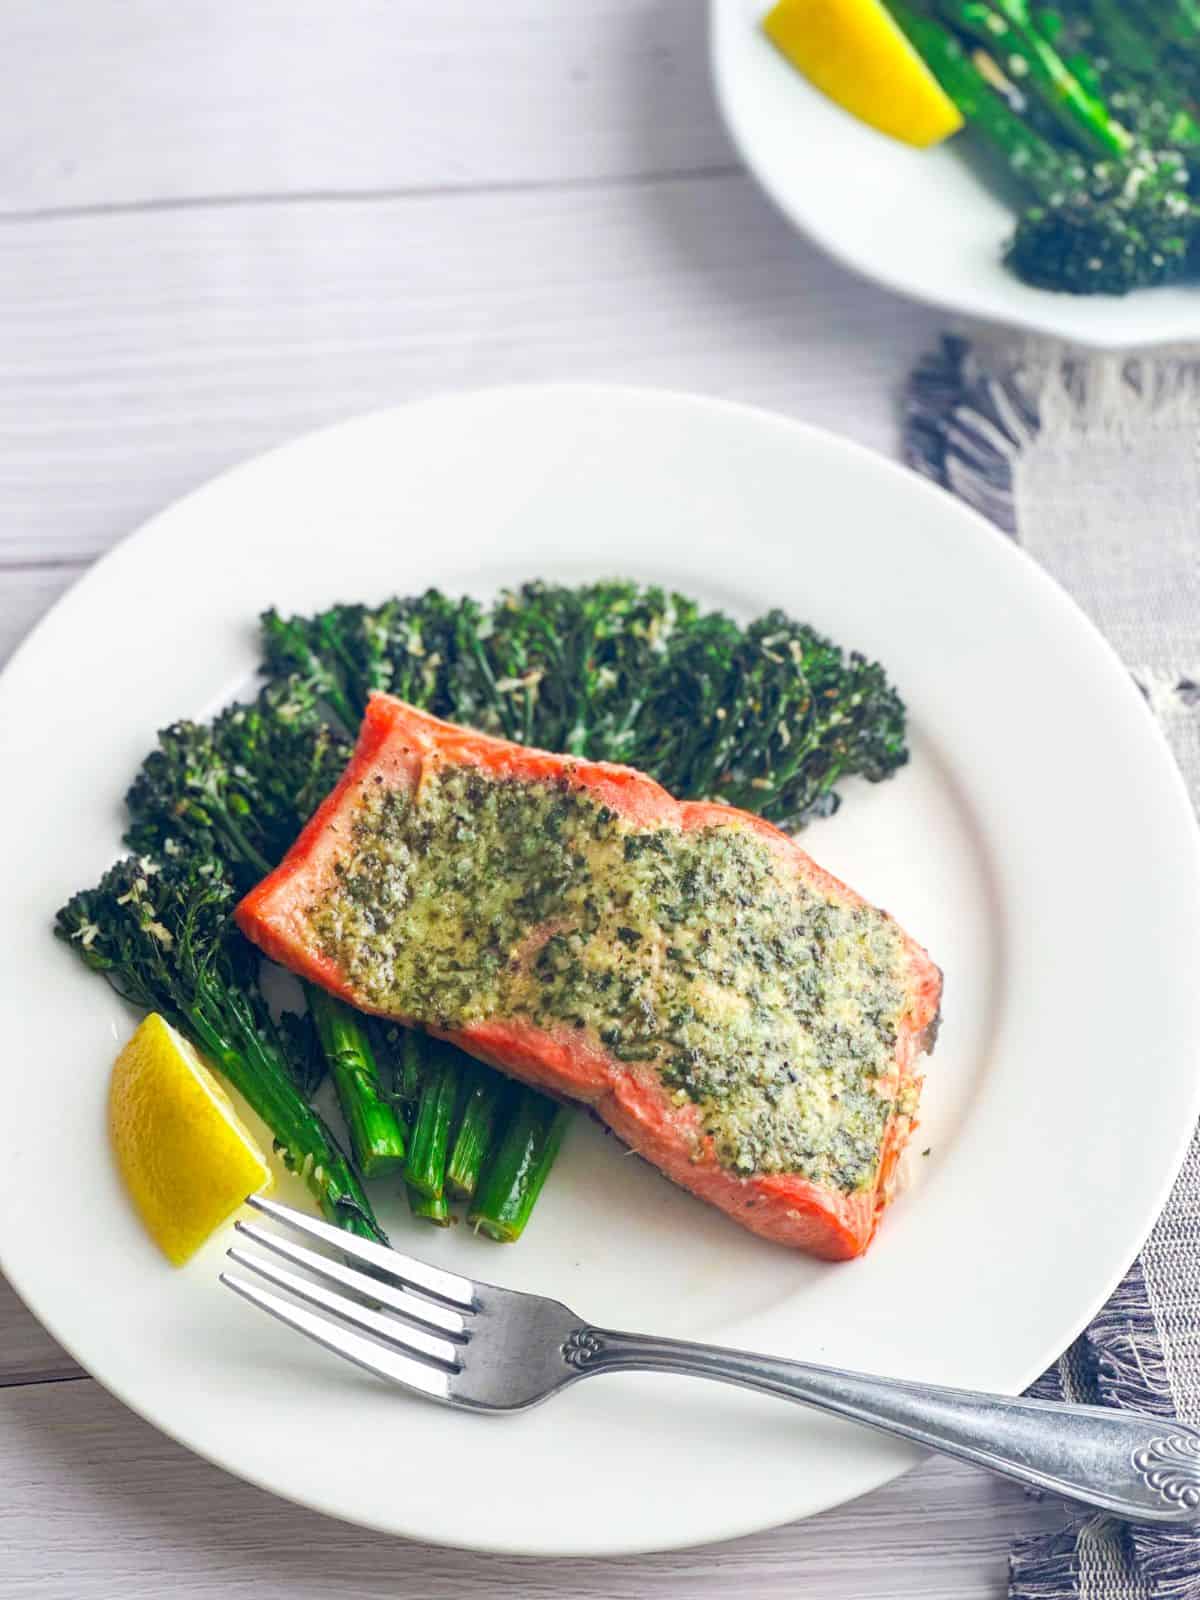 Pesto butter topped salmon with broccolini and a fork on a white plate.